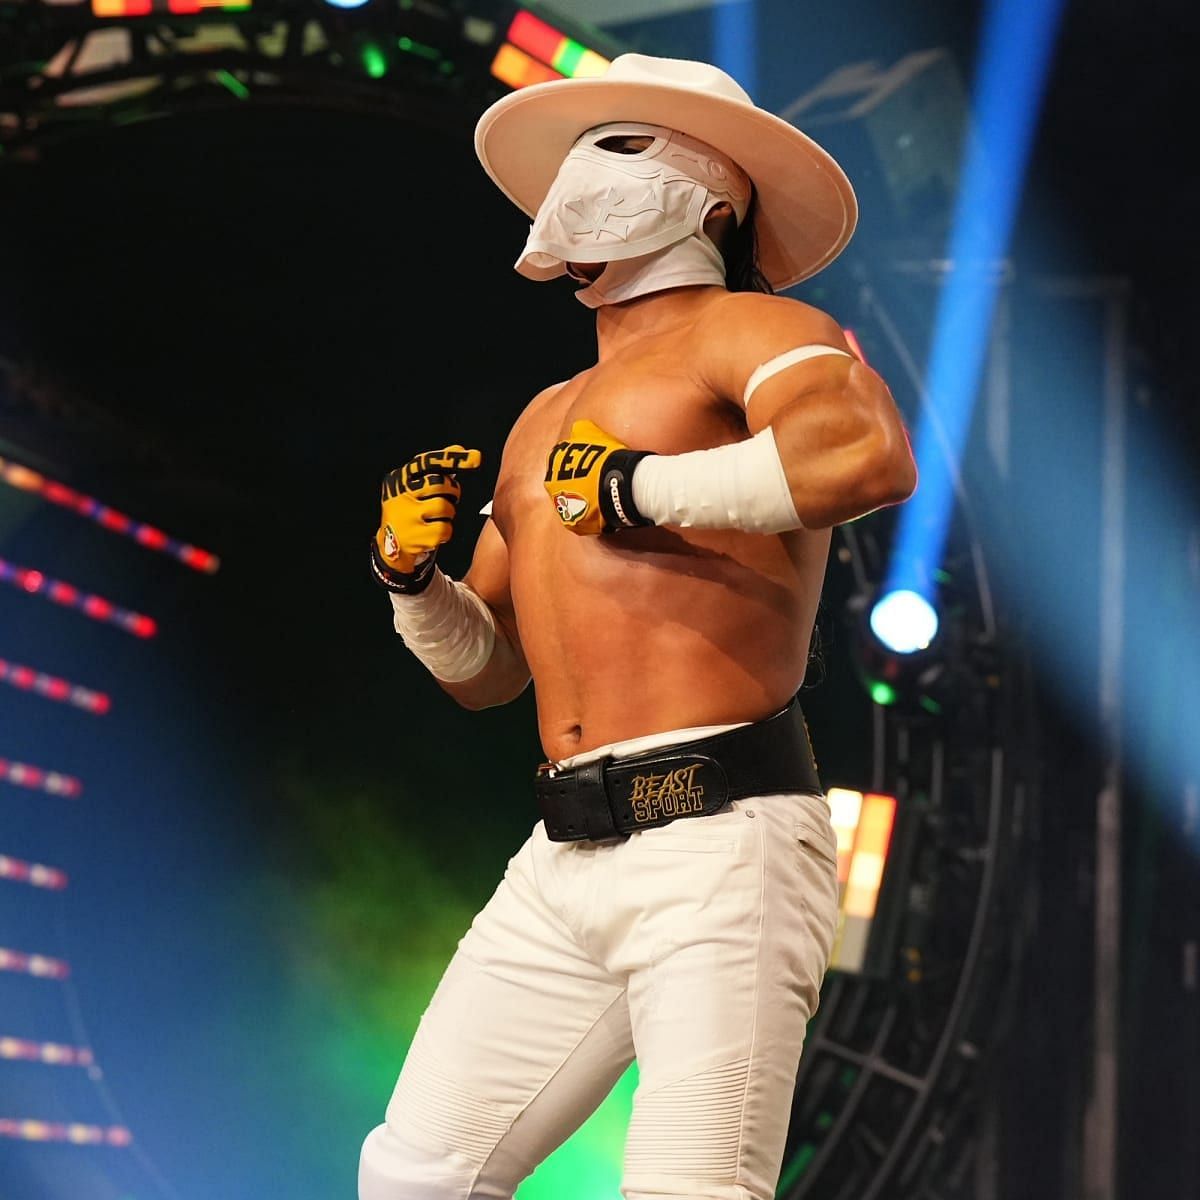 Bandido is a top talent wherever he wrestles.